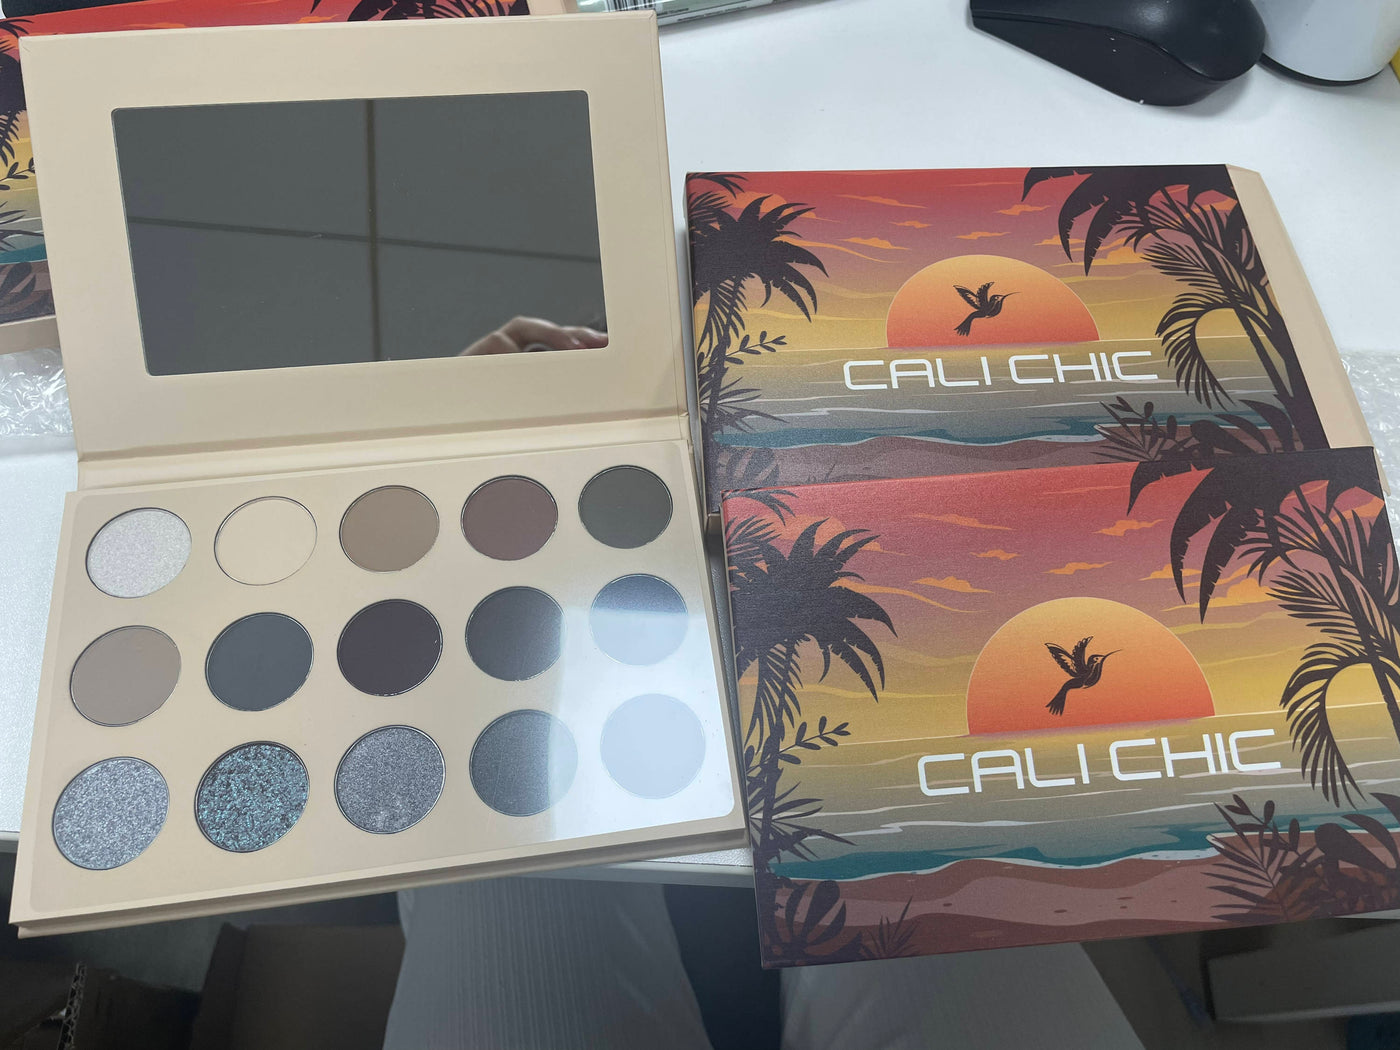 Cali Chic Glitter Nude Eyeshadow Palette Matte Metallic Celebrity Cosmetic Make Up Travel Pack